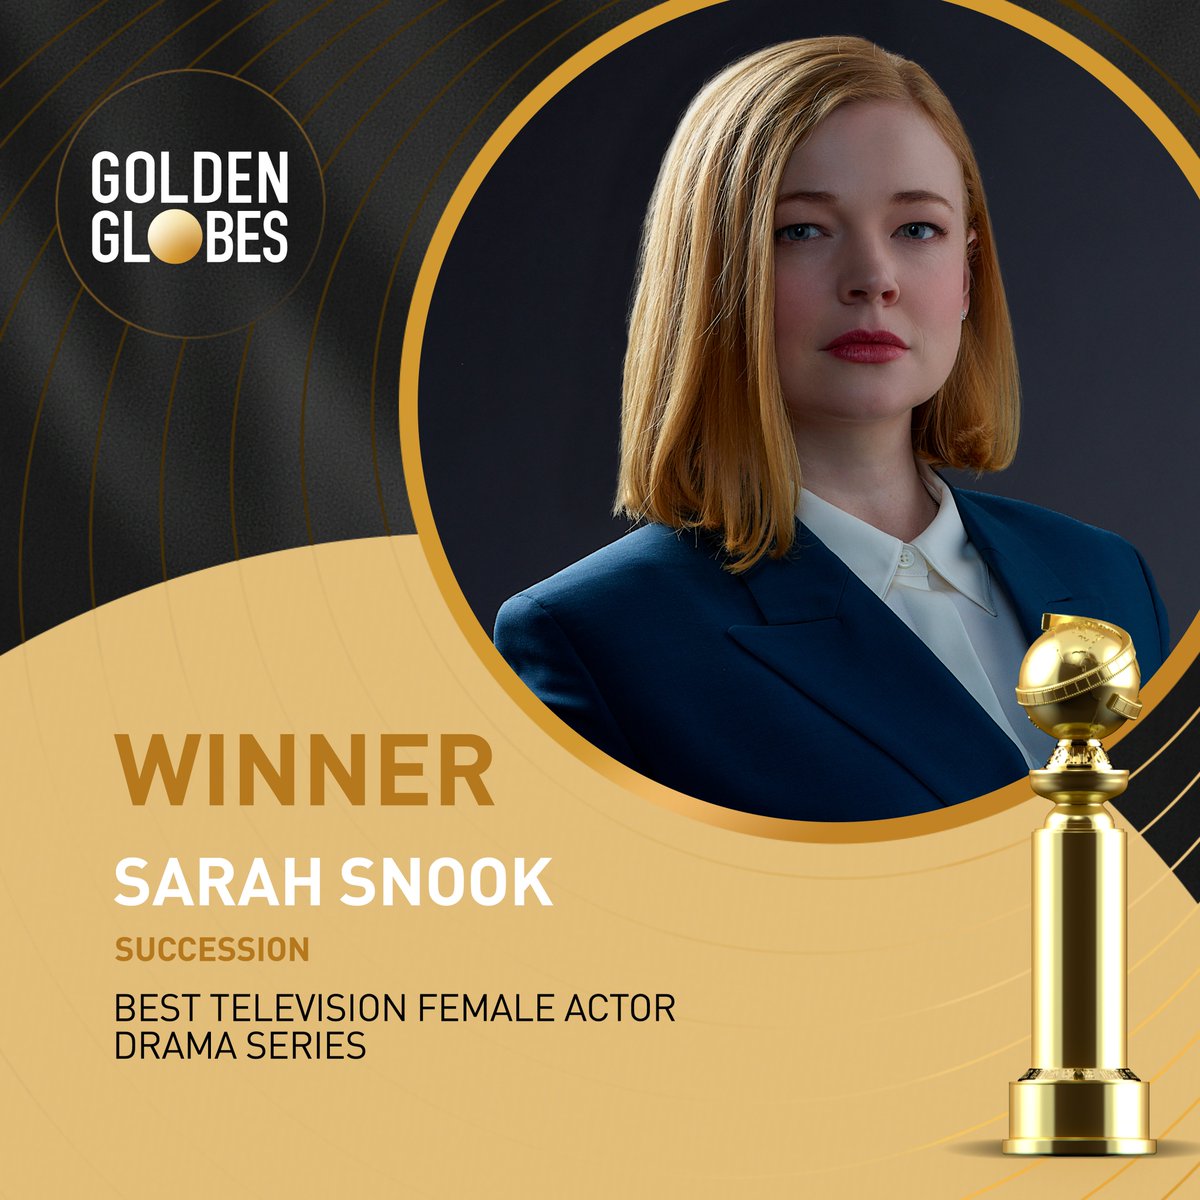 She's done it! Congratulations Sarah Snook, you're taking home the 🏆 for Best Television Female Actor – Drama Series! #GoldenGlobes